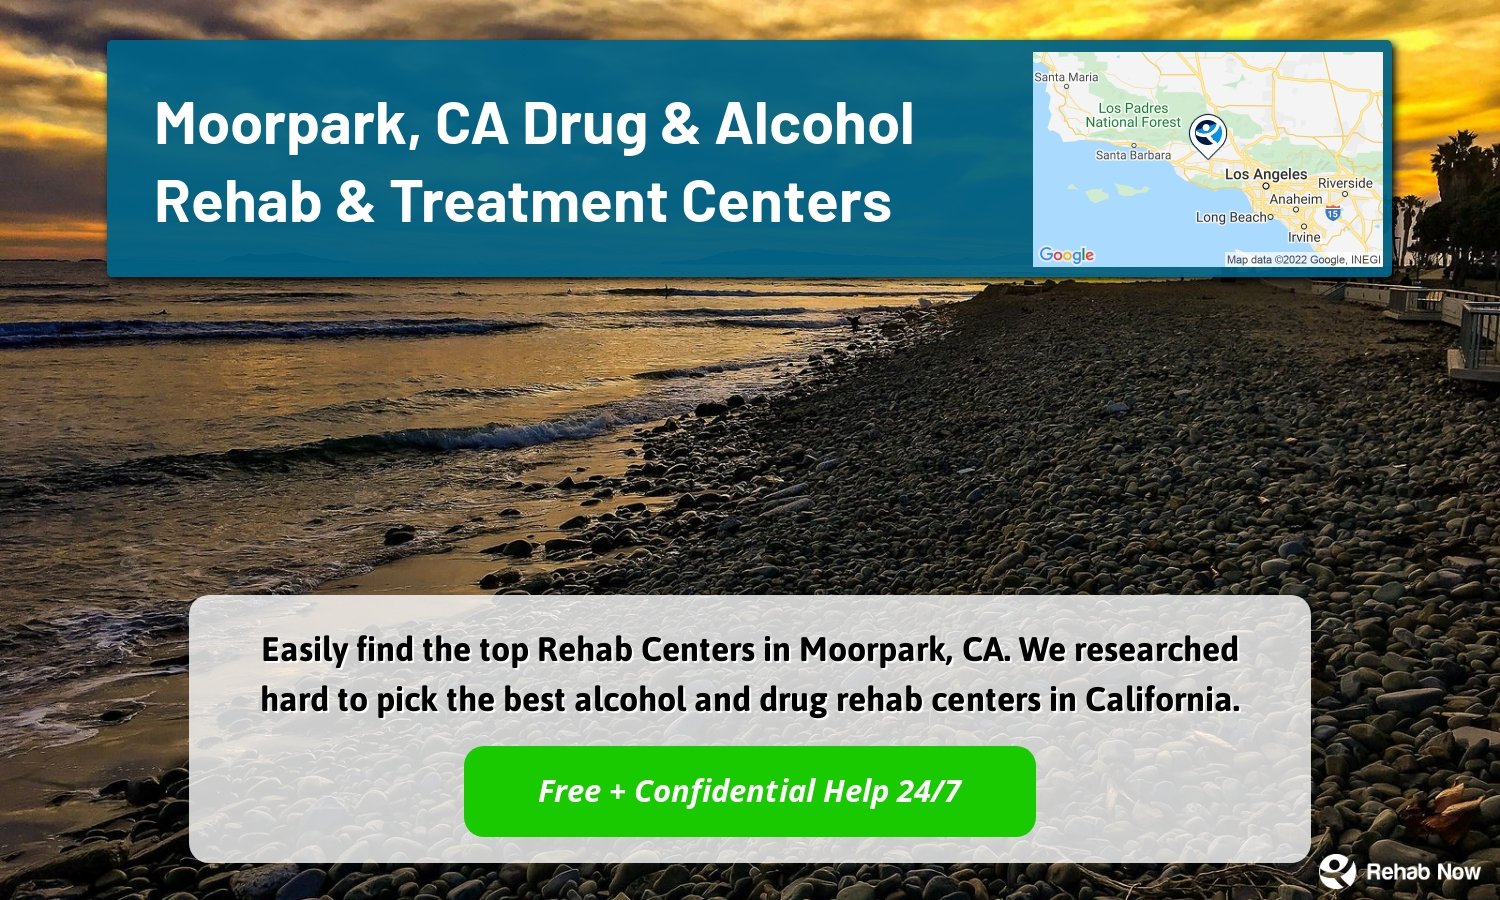 Easily find the top Rehab Centers in Moorpark, CA. We researched hard to pick the best alcohol and drug rehab centers in California.